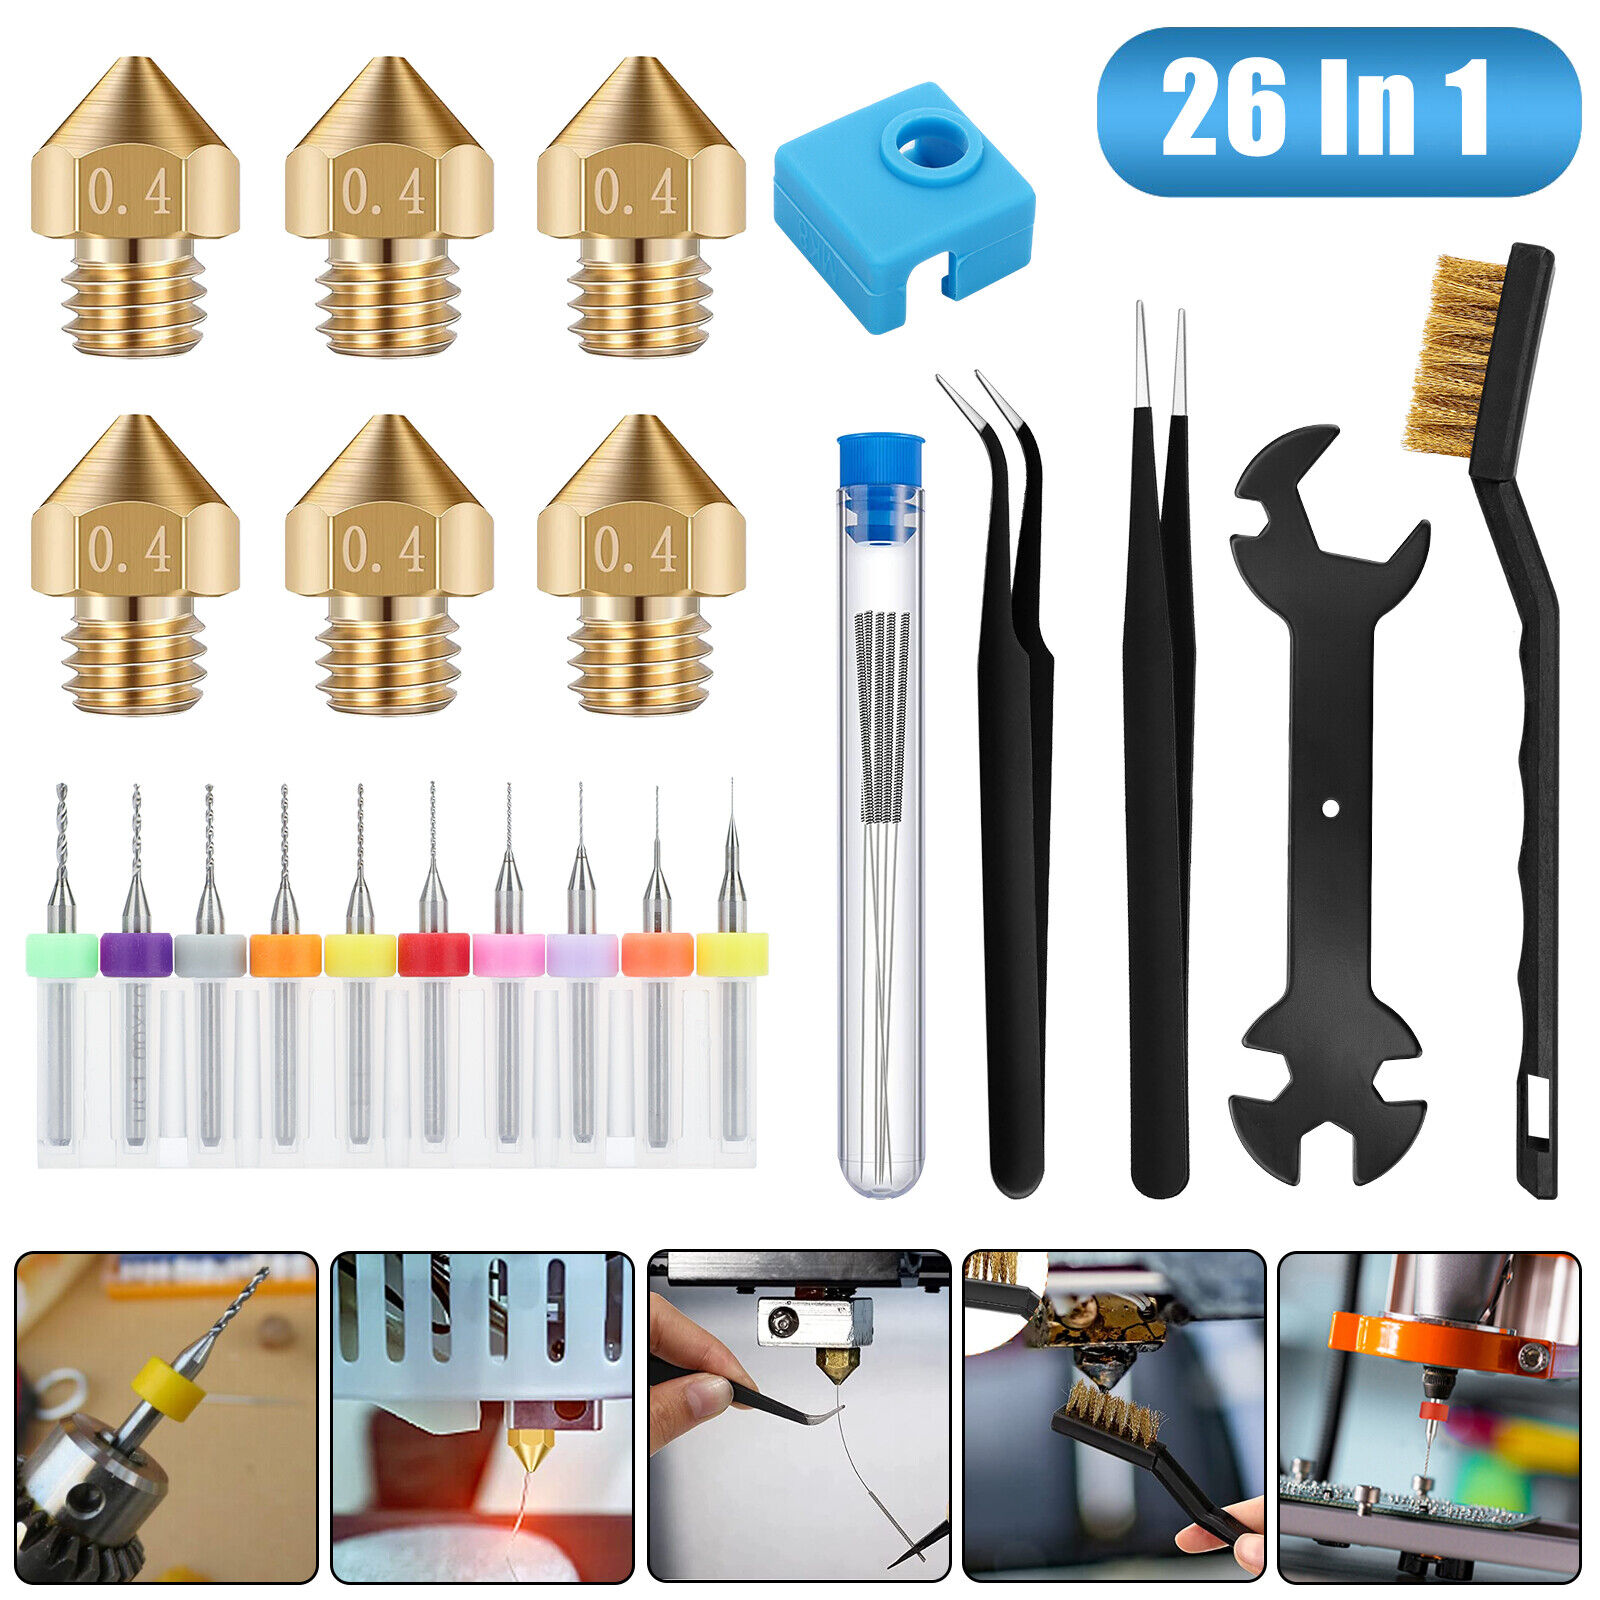 3D Printer Extruder Nozzle Cleaning Needles Tool Kit for CR-10/Ender 3 Pro/ 3 V2